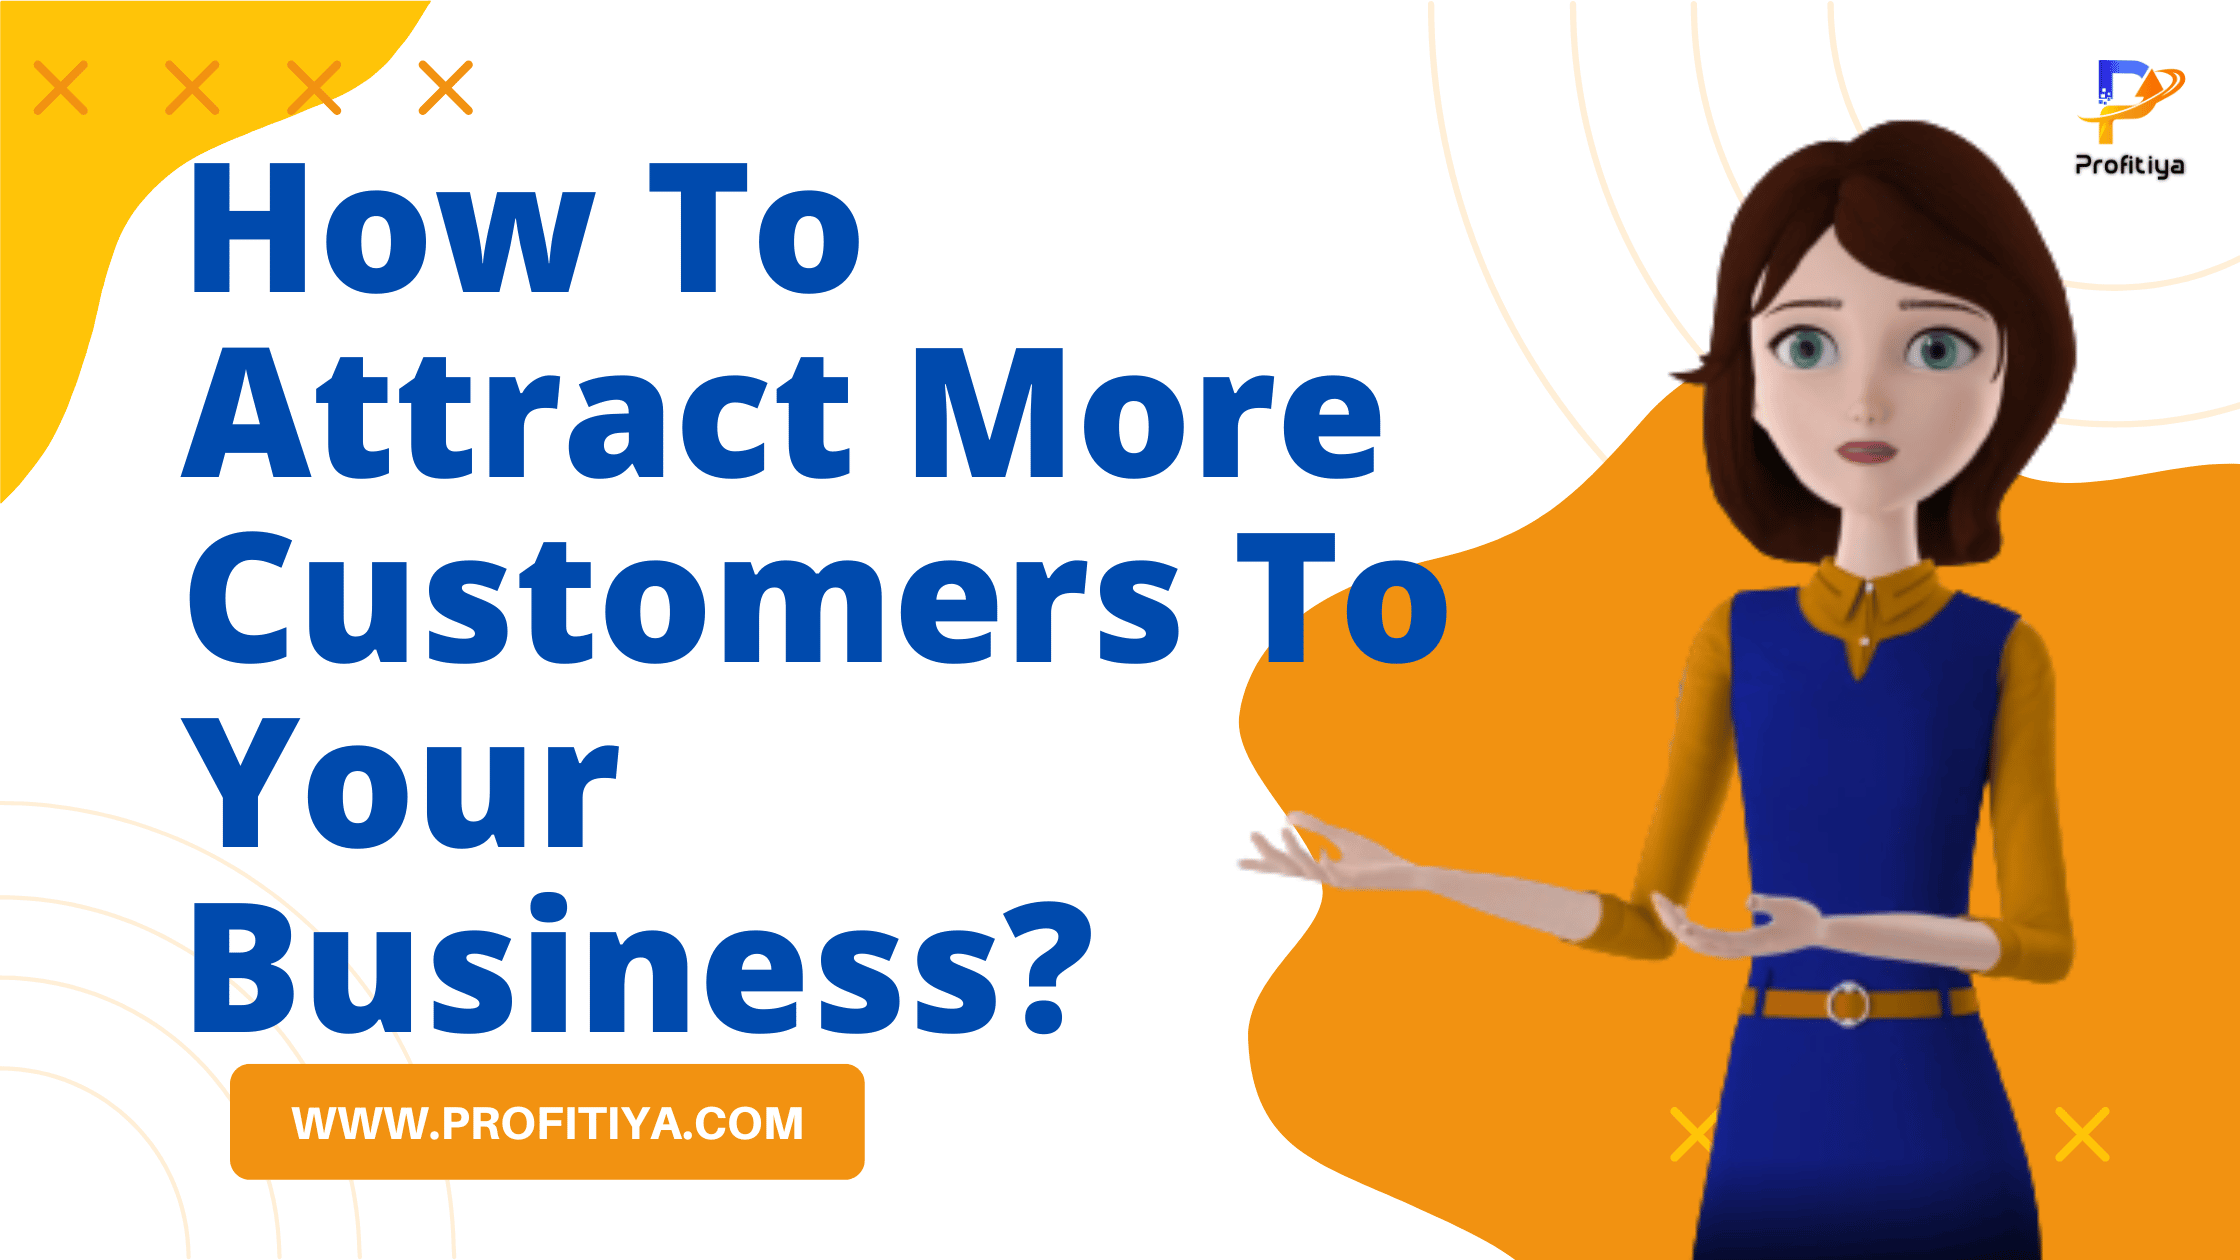 How To Attract More Customers To Your Business?